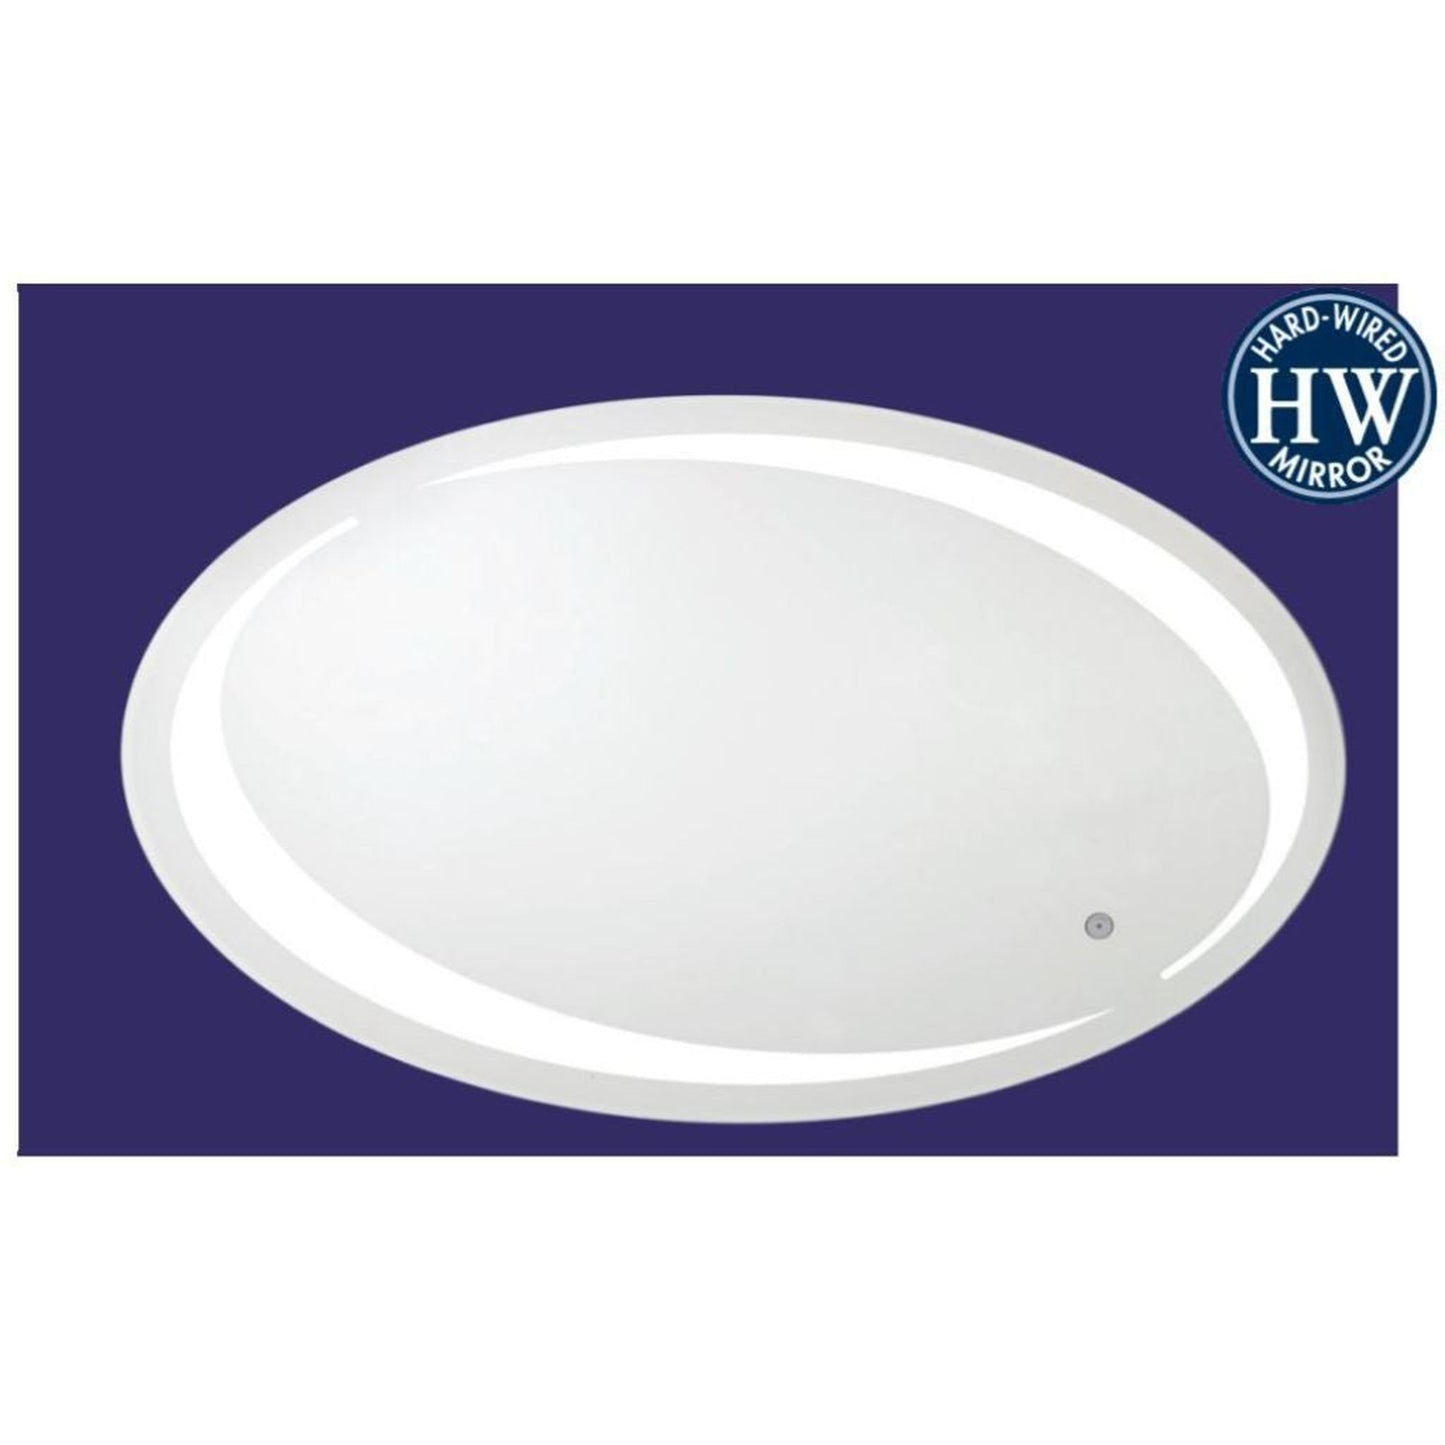 Aptations Sergeña Sol 23" x 35" Wall-Mounted Oval Hardwired LED Back-Lit Vanity Mirror With Tunable 2,700K Warm White to 5,800K Cool white Light Color